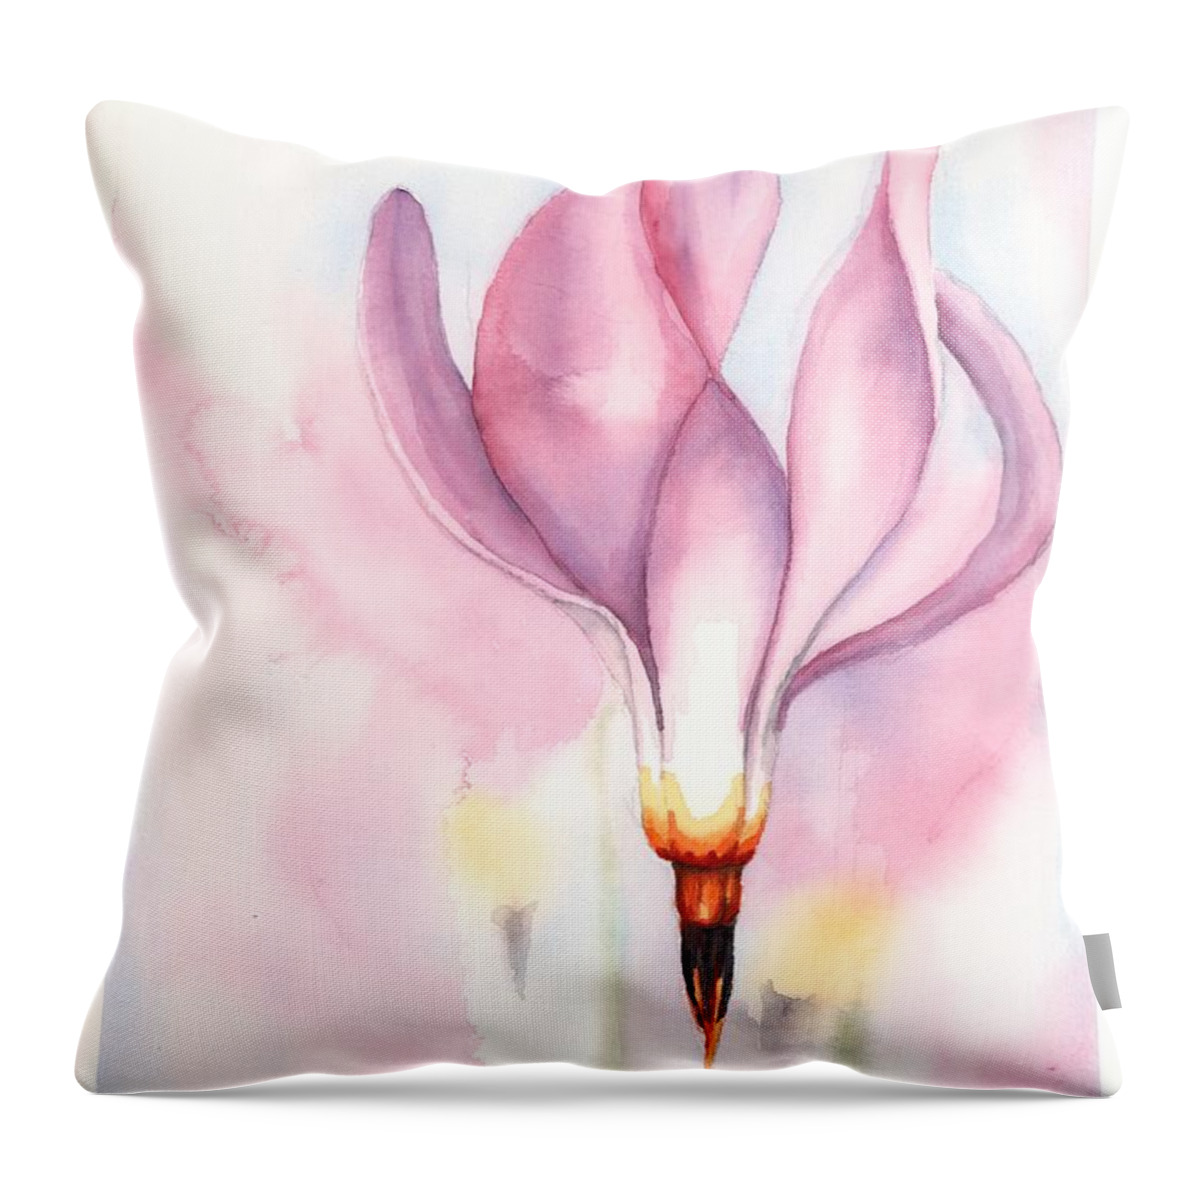 Dodecatheon Media Throw Pillow featuring the painting Shooting Stars by Hilda Wagner